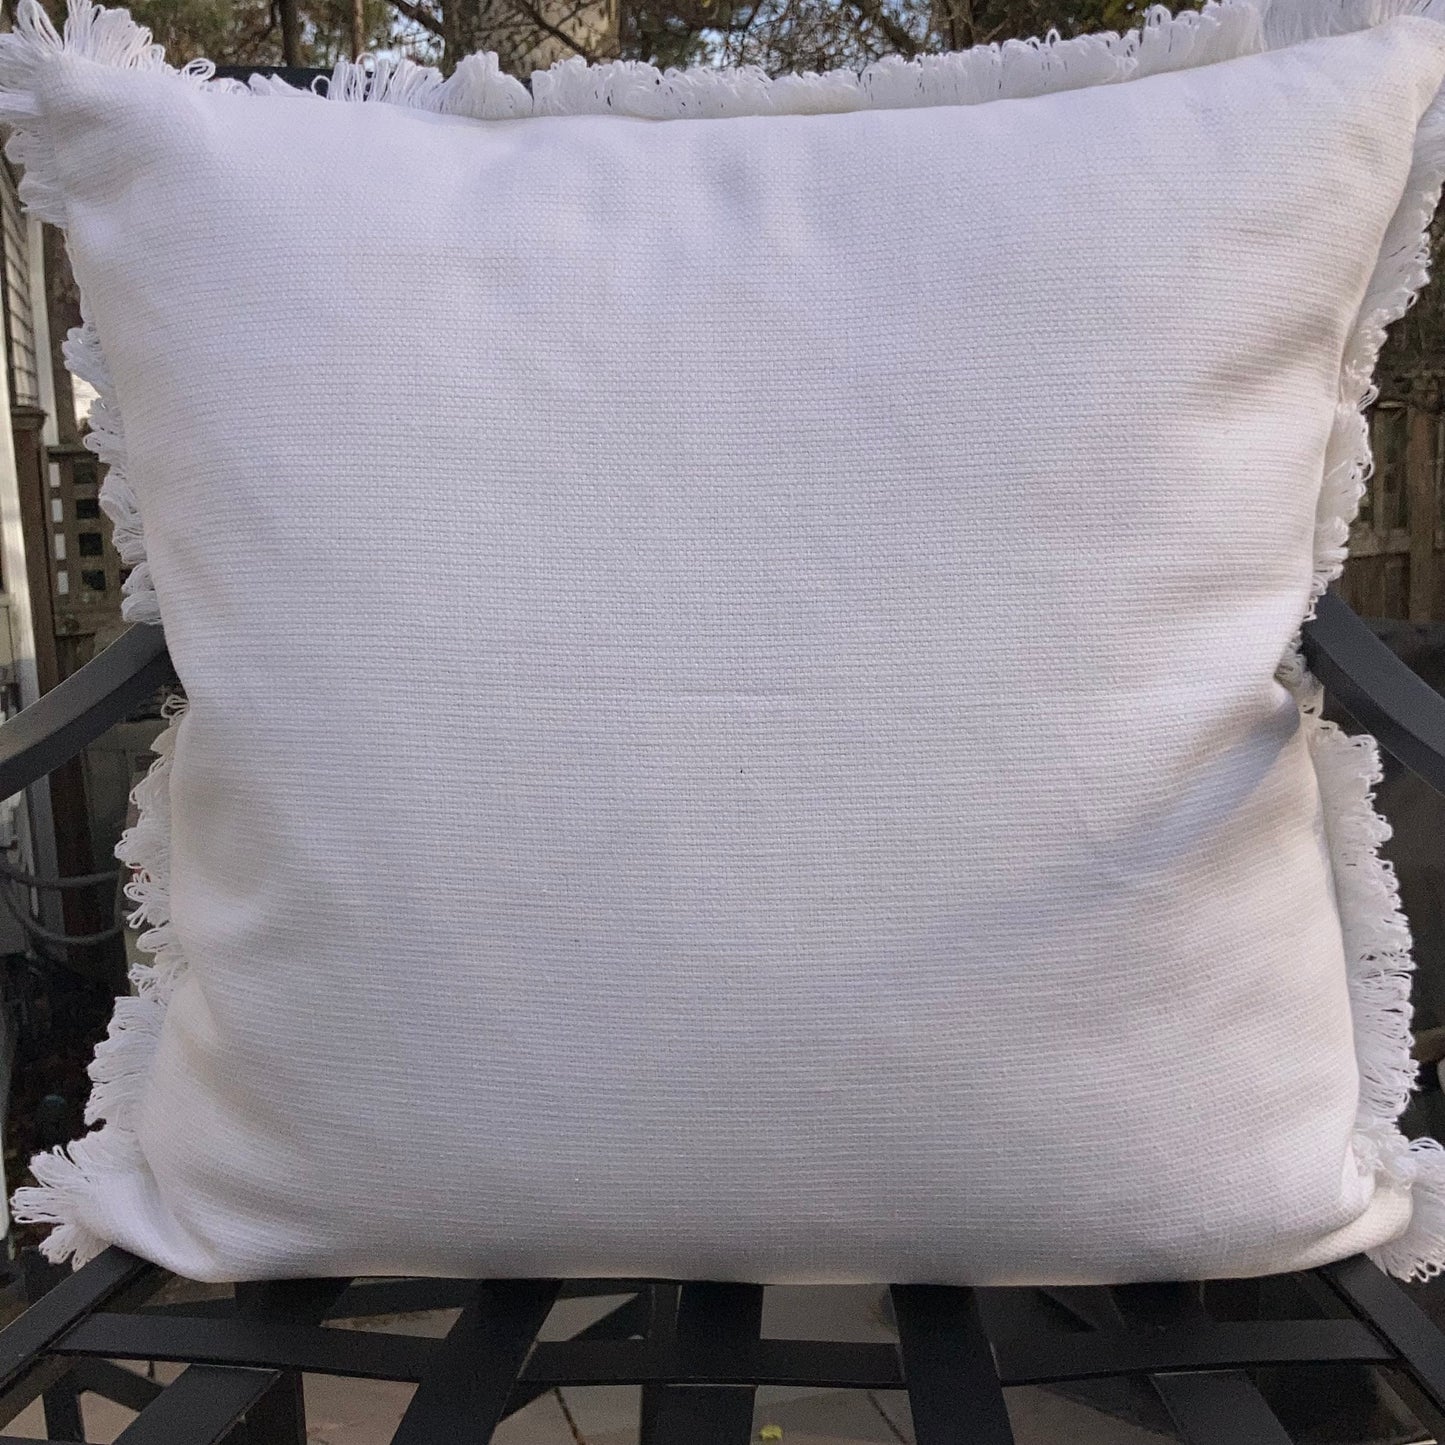 Goa Blue and White Square Designer Pillow Back 22 X 22 Square with Down Feather Insert